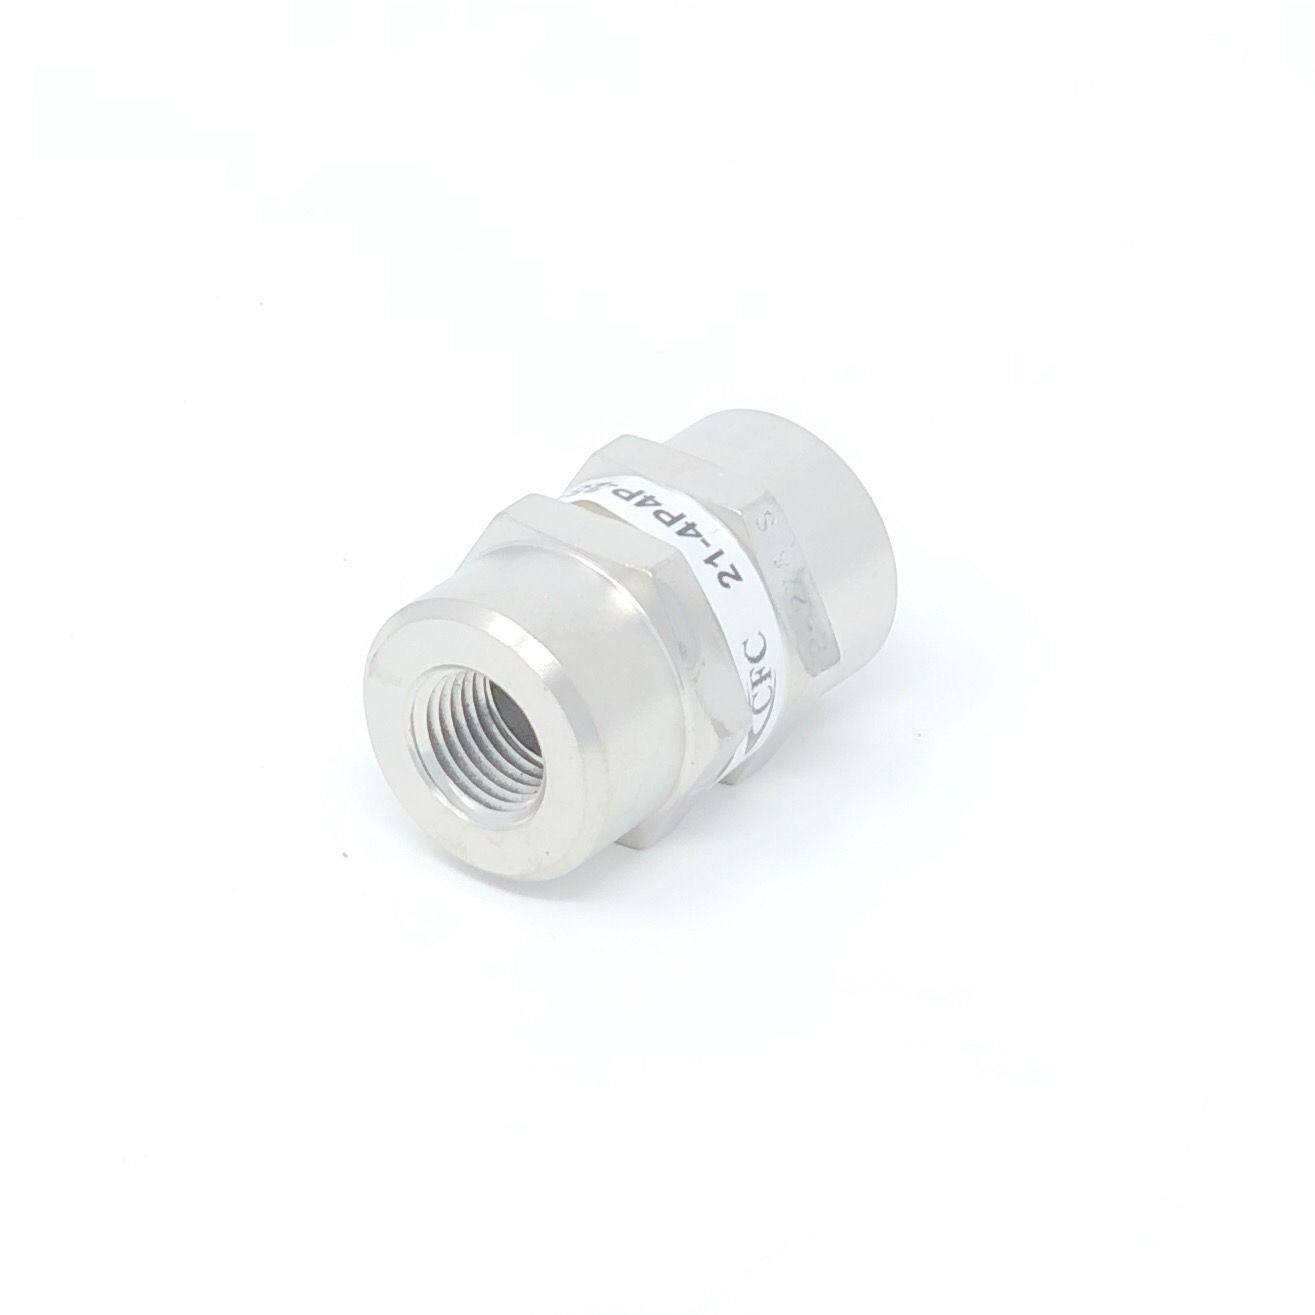 21-12M12M-18S : Chase High Pressure Inline Filter, 3000psi, #12 SAE (3/4"), 18 Micron, No Visual Indicator, With Bypass